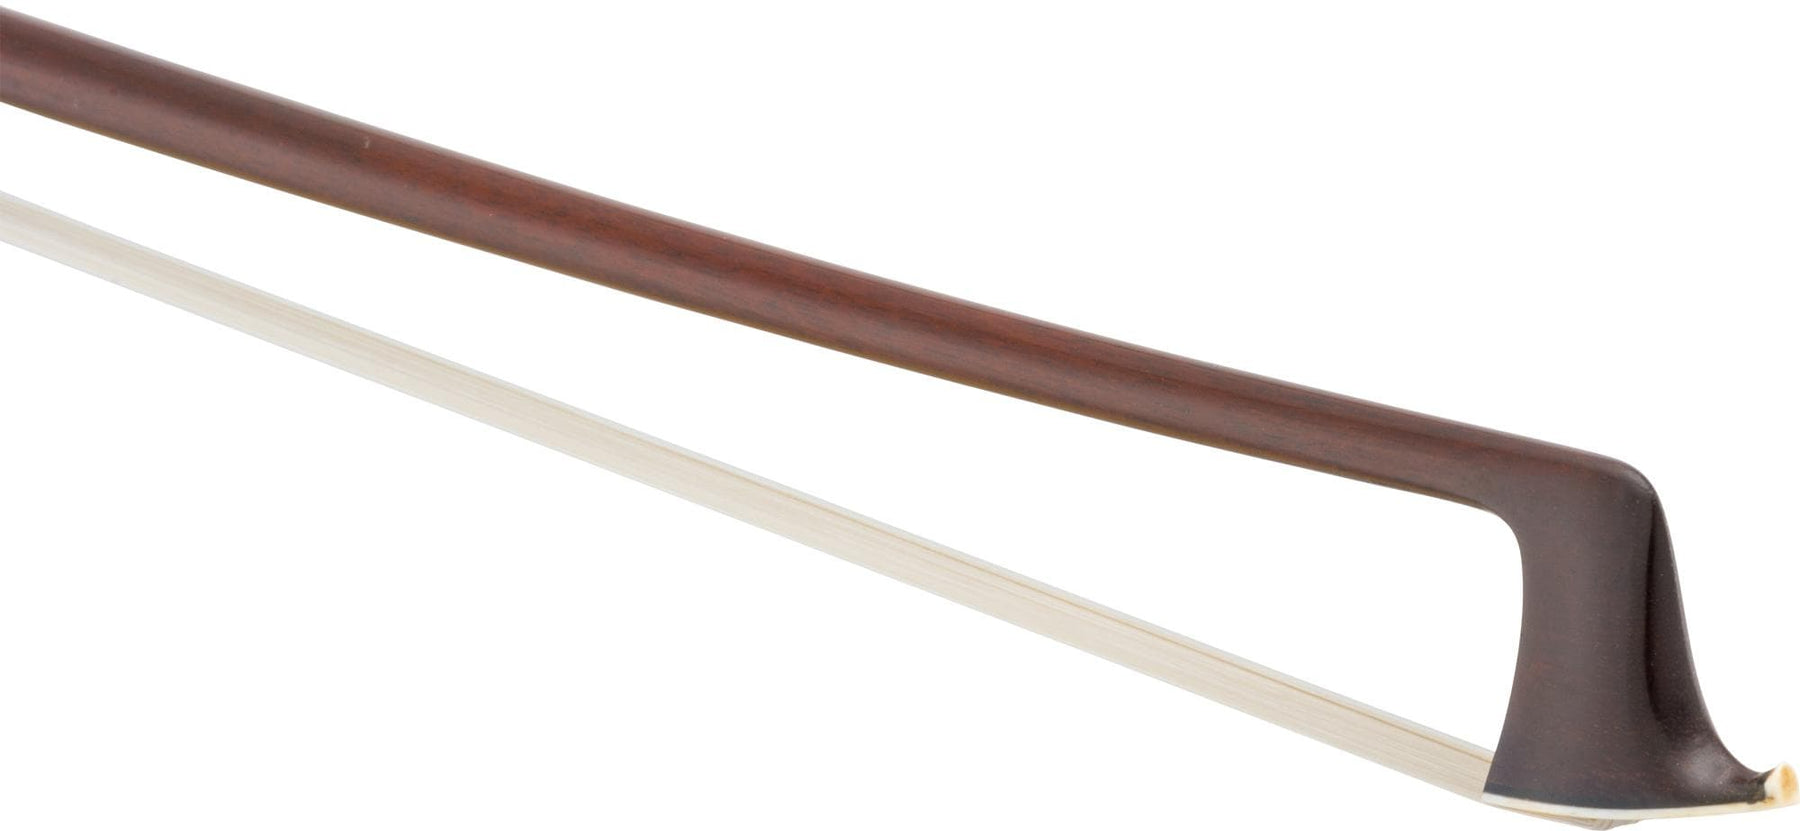 Eugene Cuniot-Hury Violin Bow